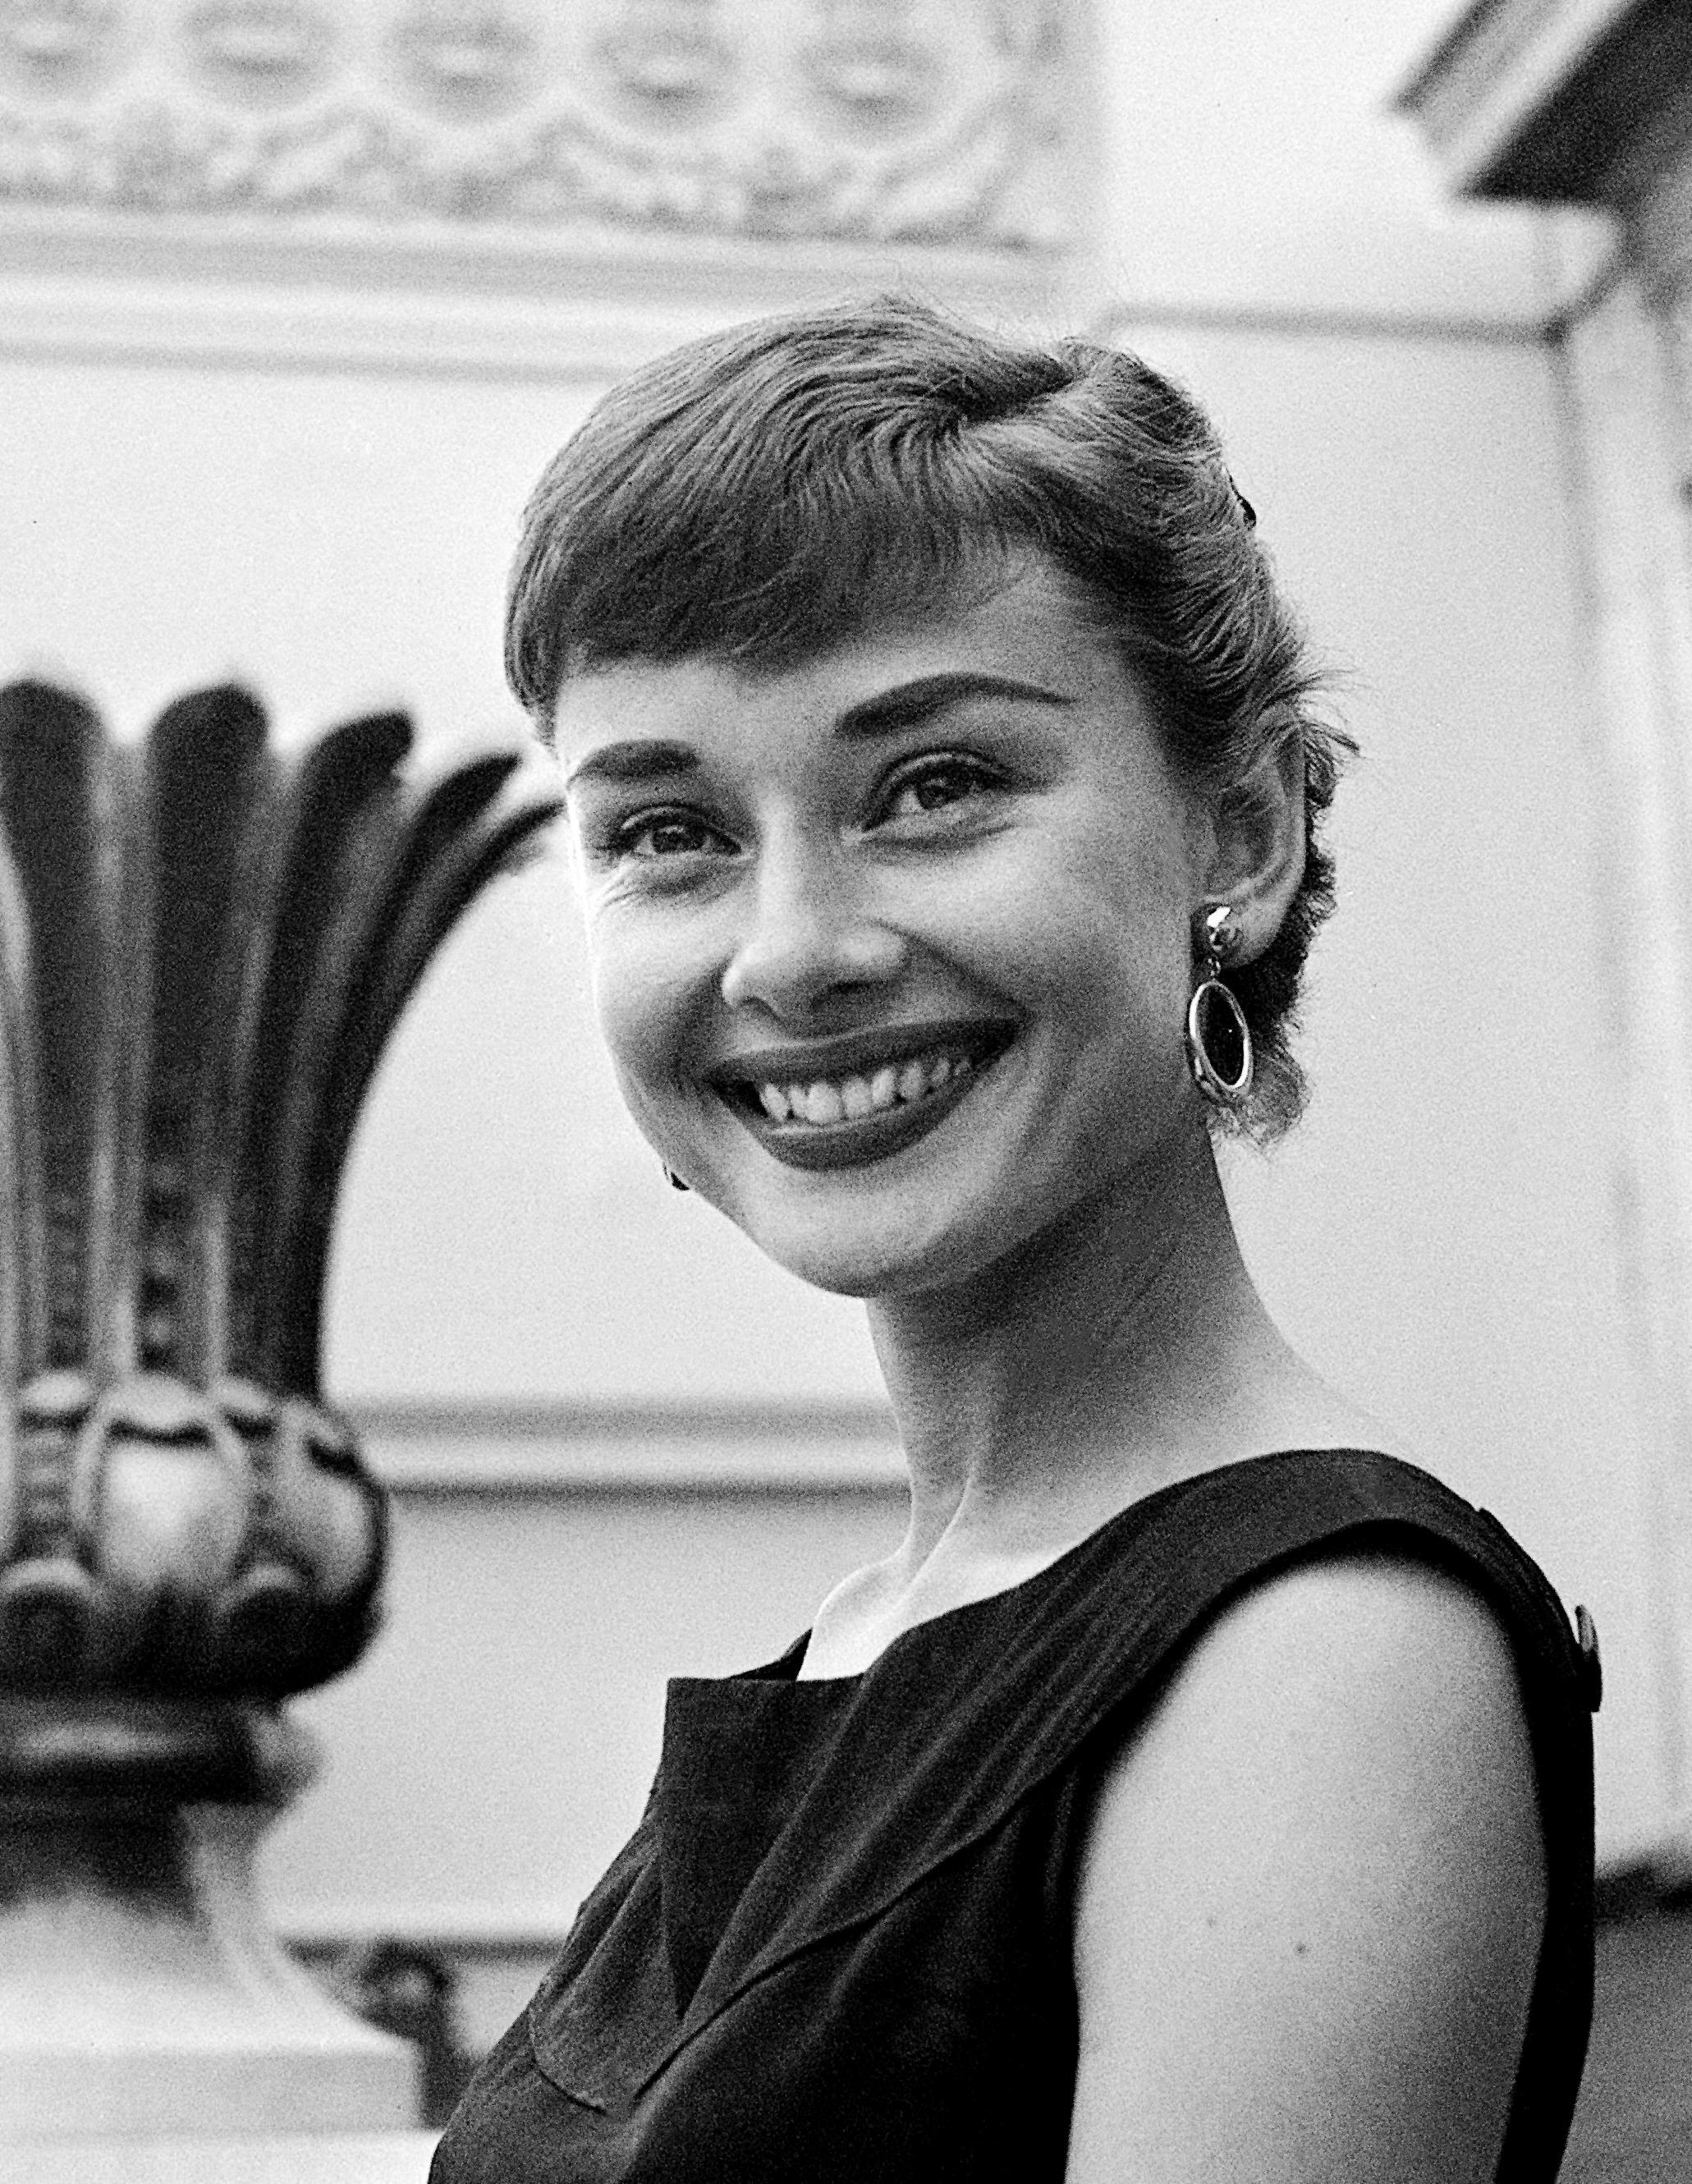 Unknown Black and White Photograph - Audrey Hepburn Candid and Smiling Globe Photos Fine Art Print